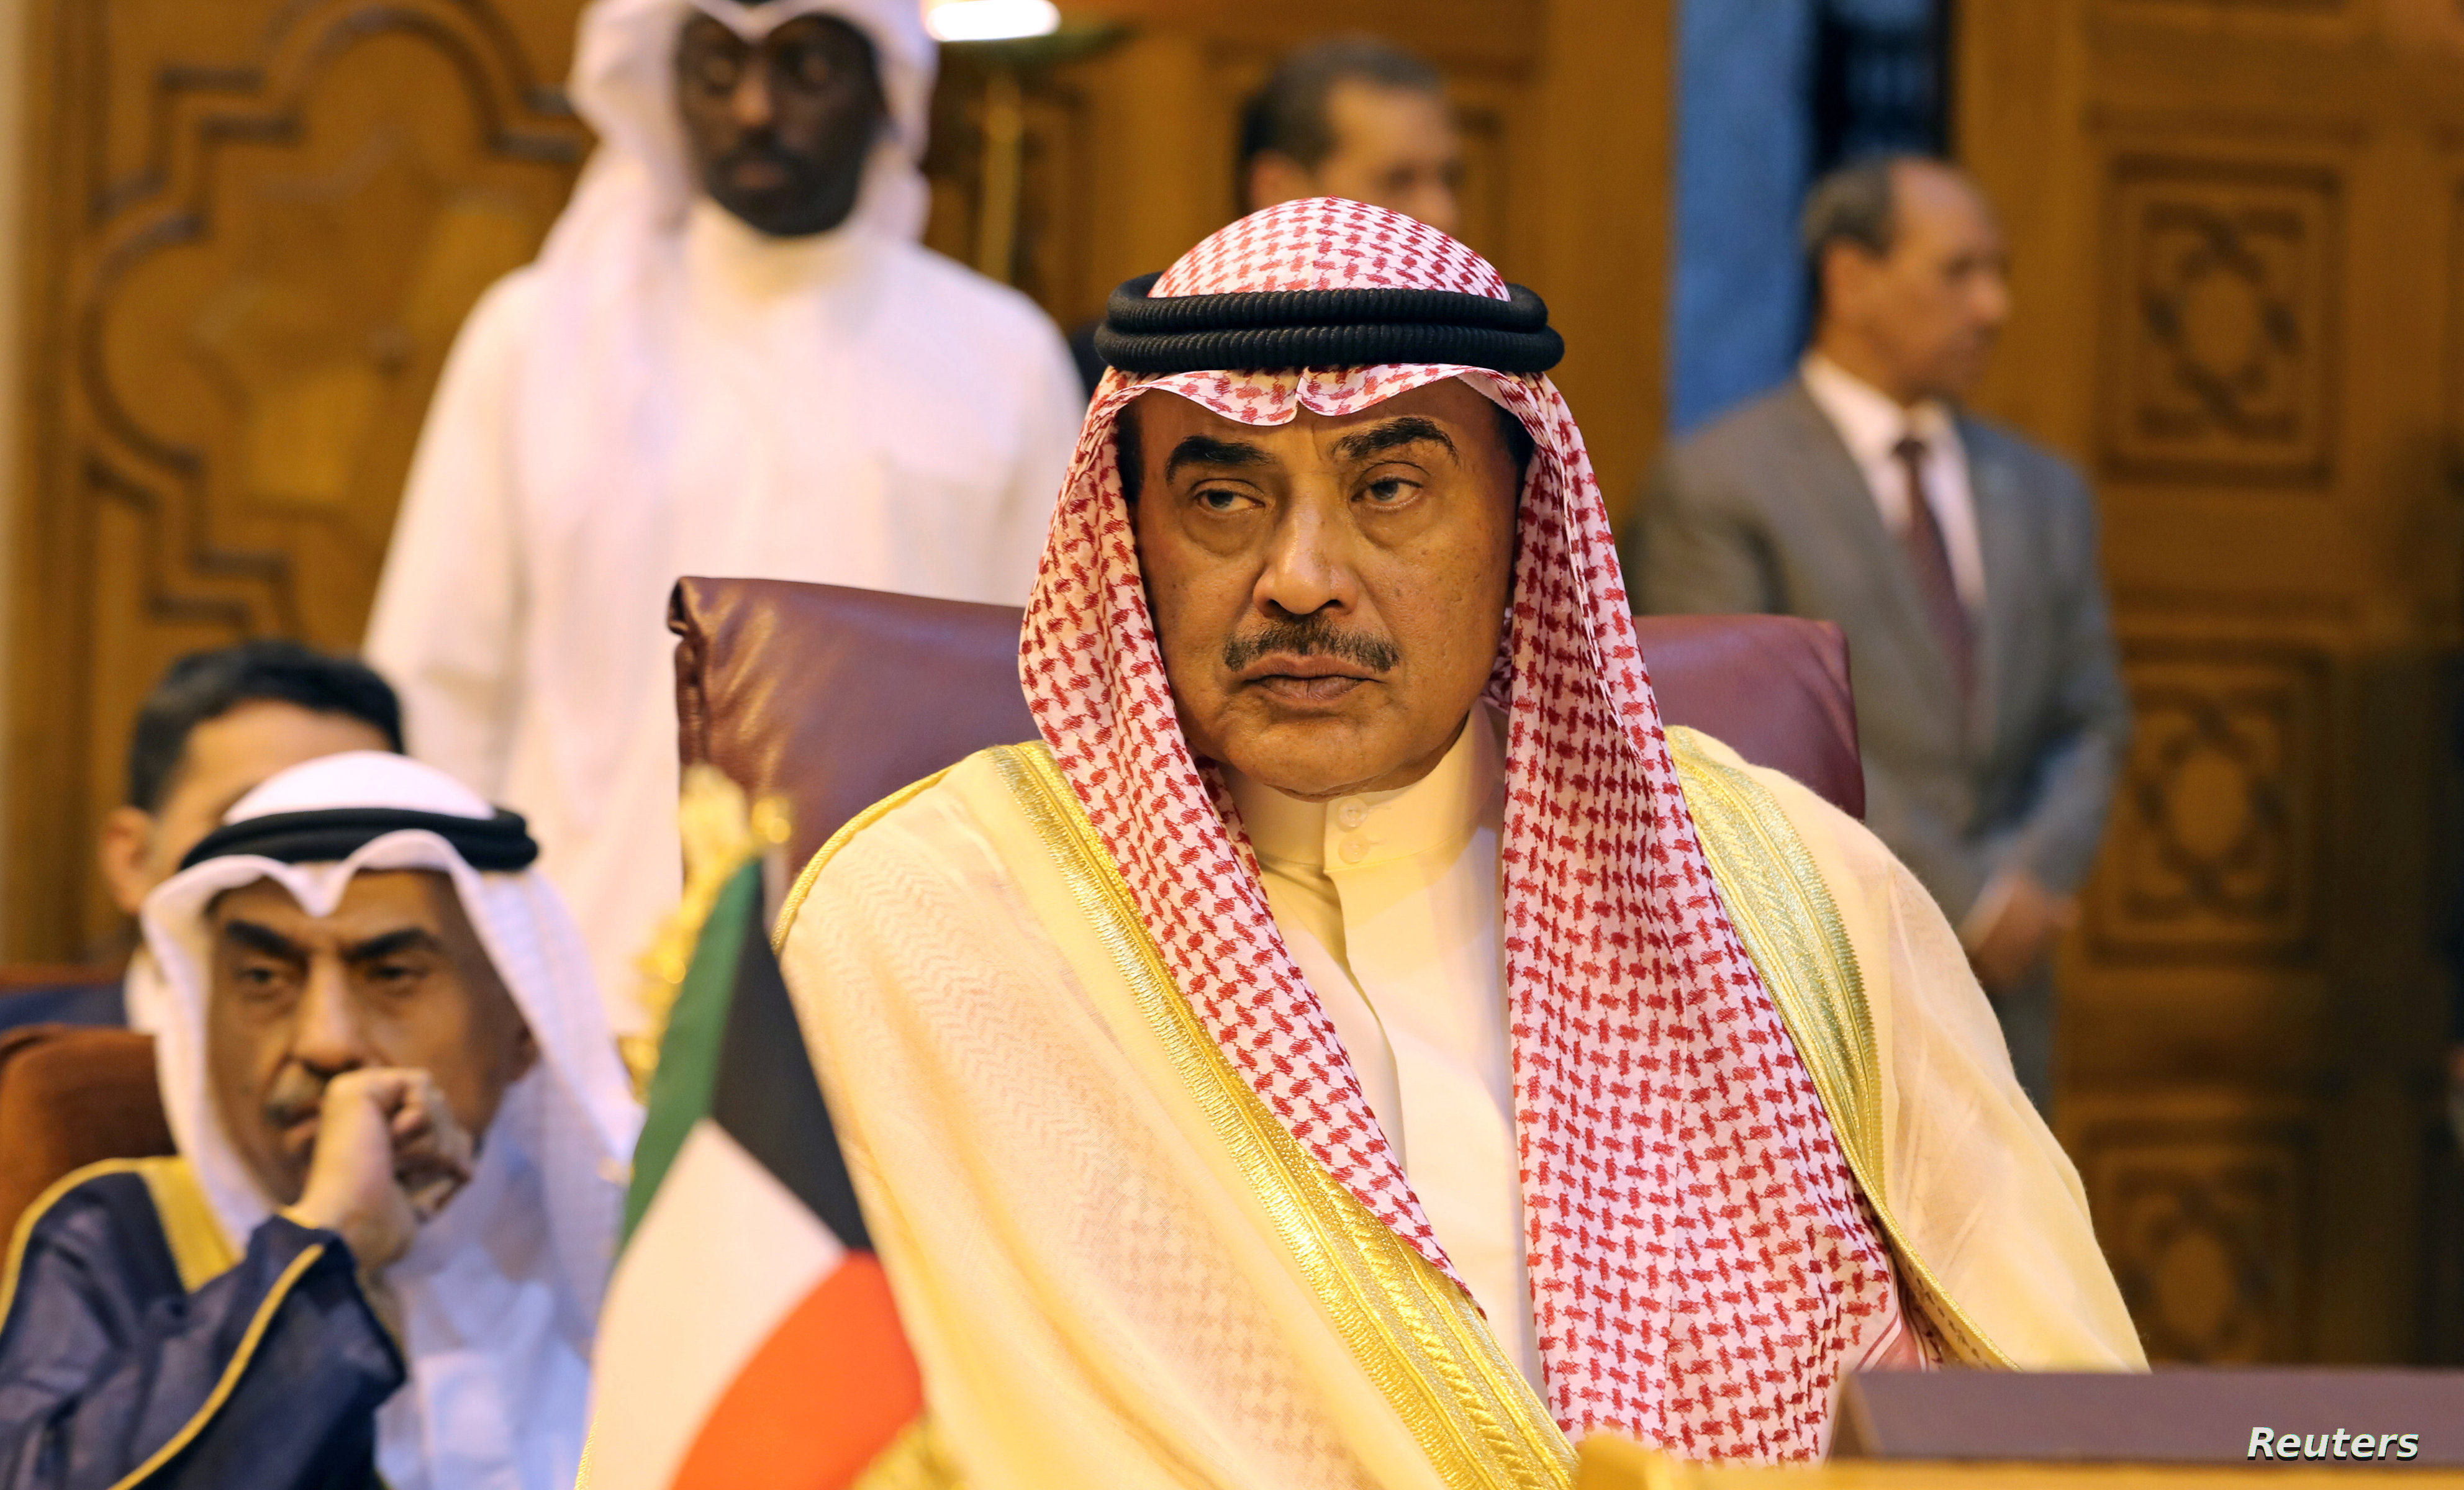 Kuwait's Foreign Minister Sheikh Sabah Al-Khalid Al-Sabah attends the Arab League's foreign ministers meeting to discuss unannounced U.S. blueprint for Israeli-Palestinian peace, in Cairo